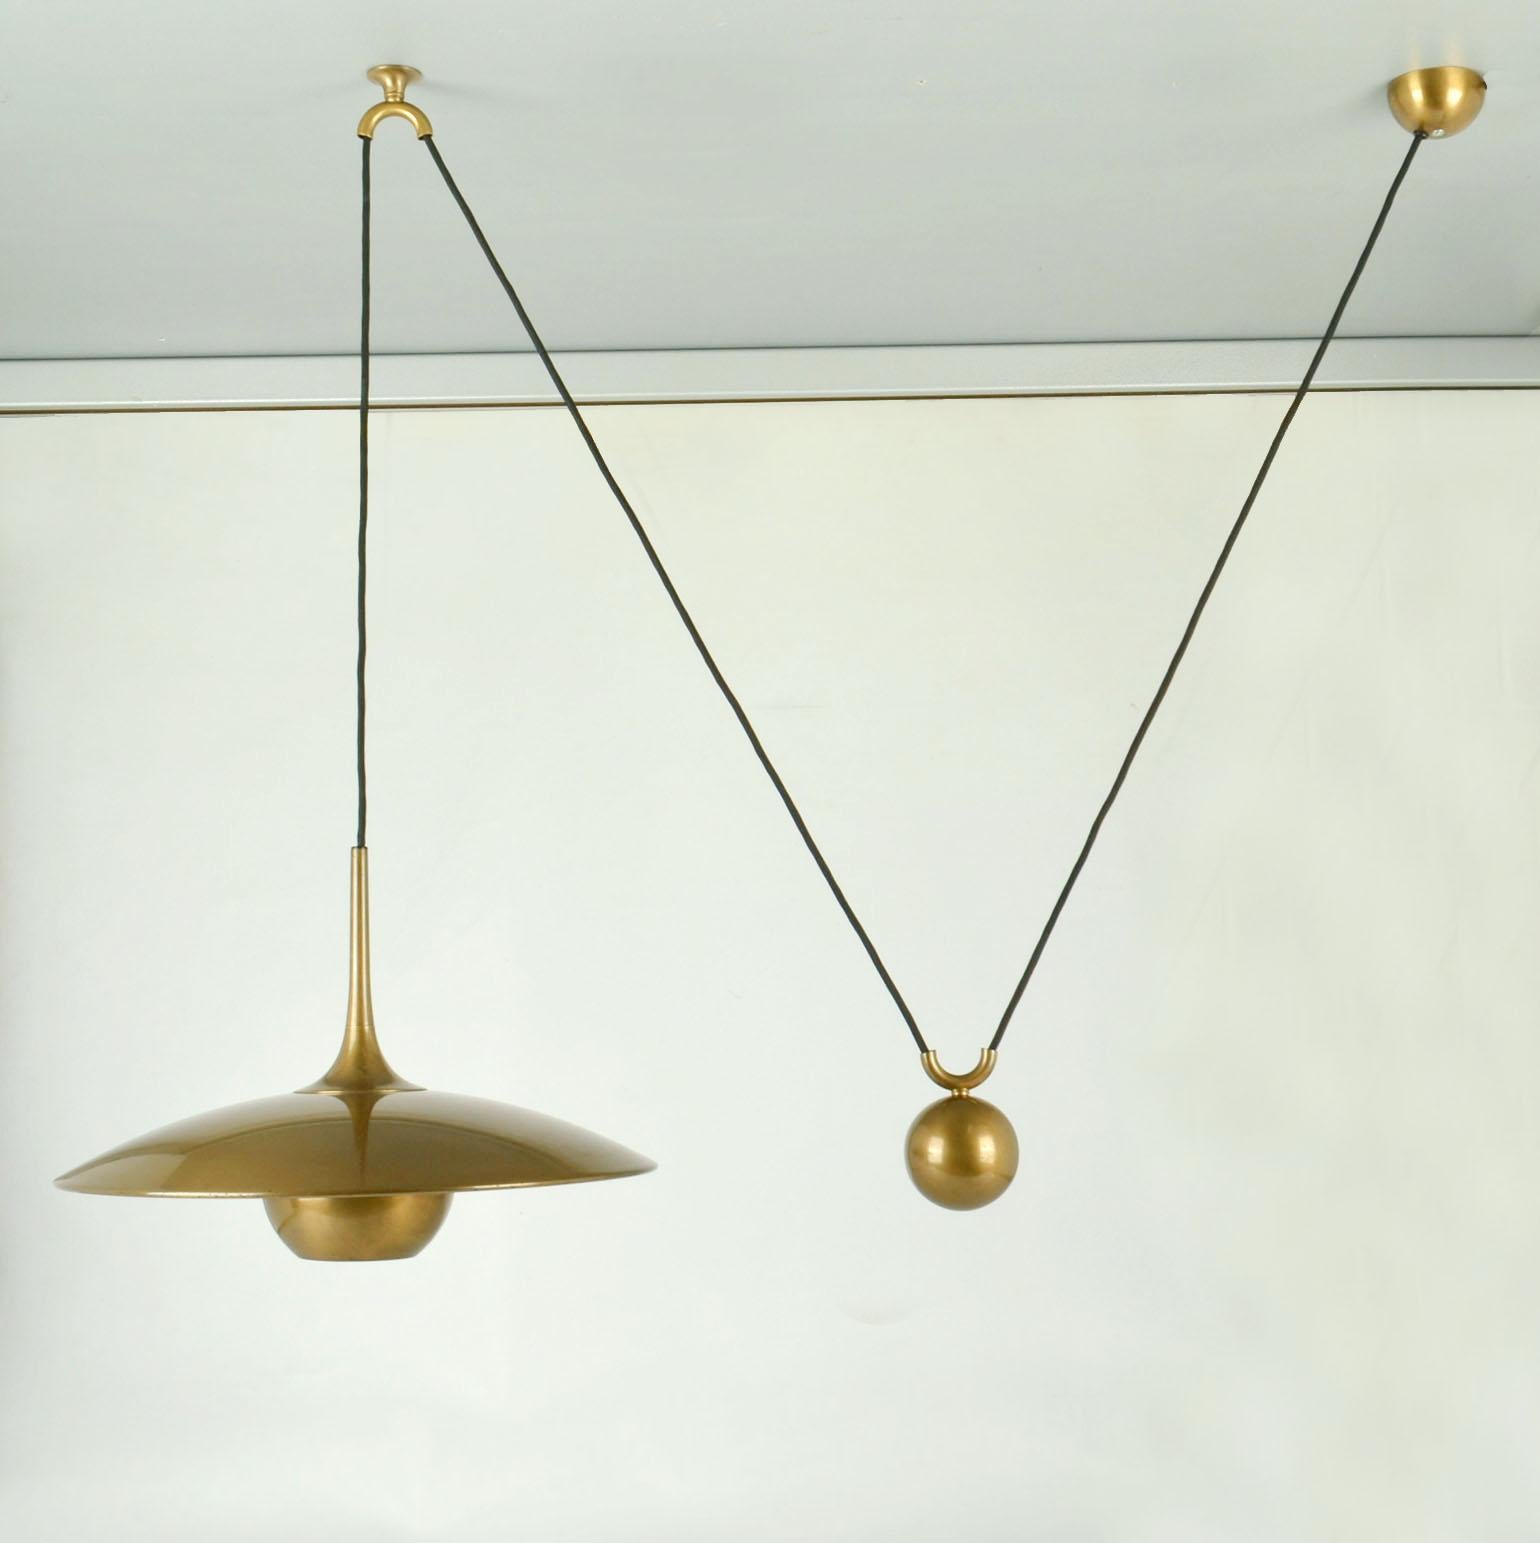 Original counterbalance pendant Onos 40 by Florian Schulz, well balanced design made in the early 1960's. The elegant pendant moves smoothly up and down due to the solid brass counterweight. High quality engineering in a brass is coated. The shade